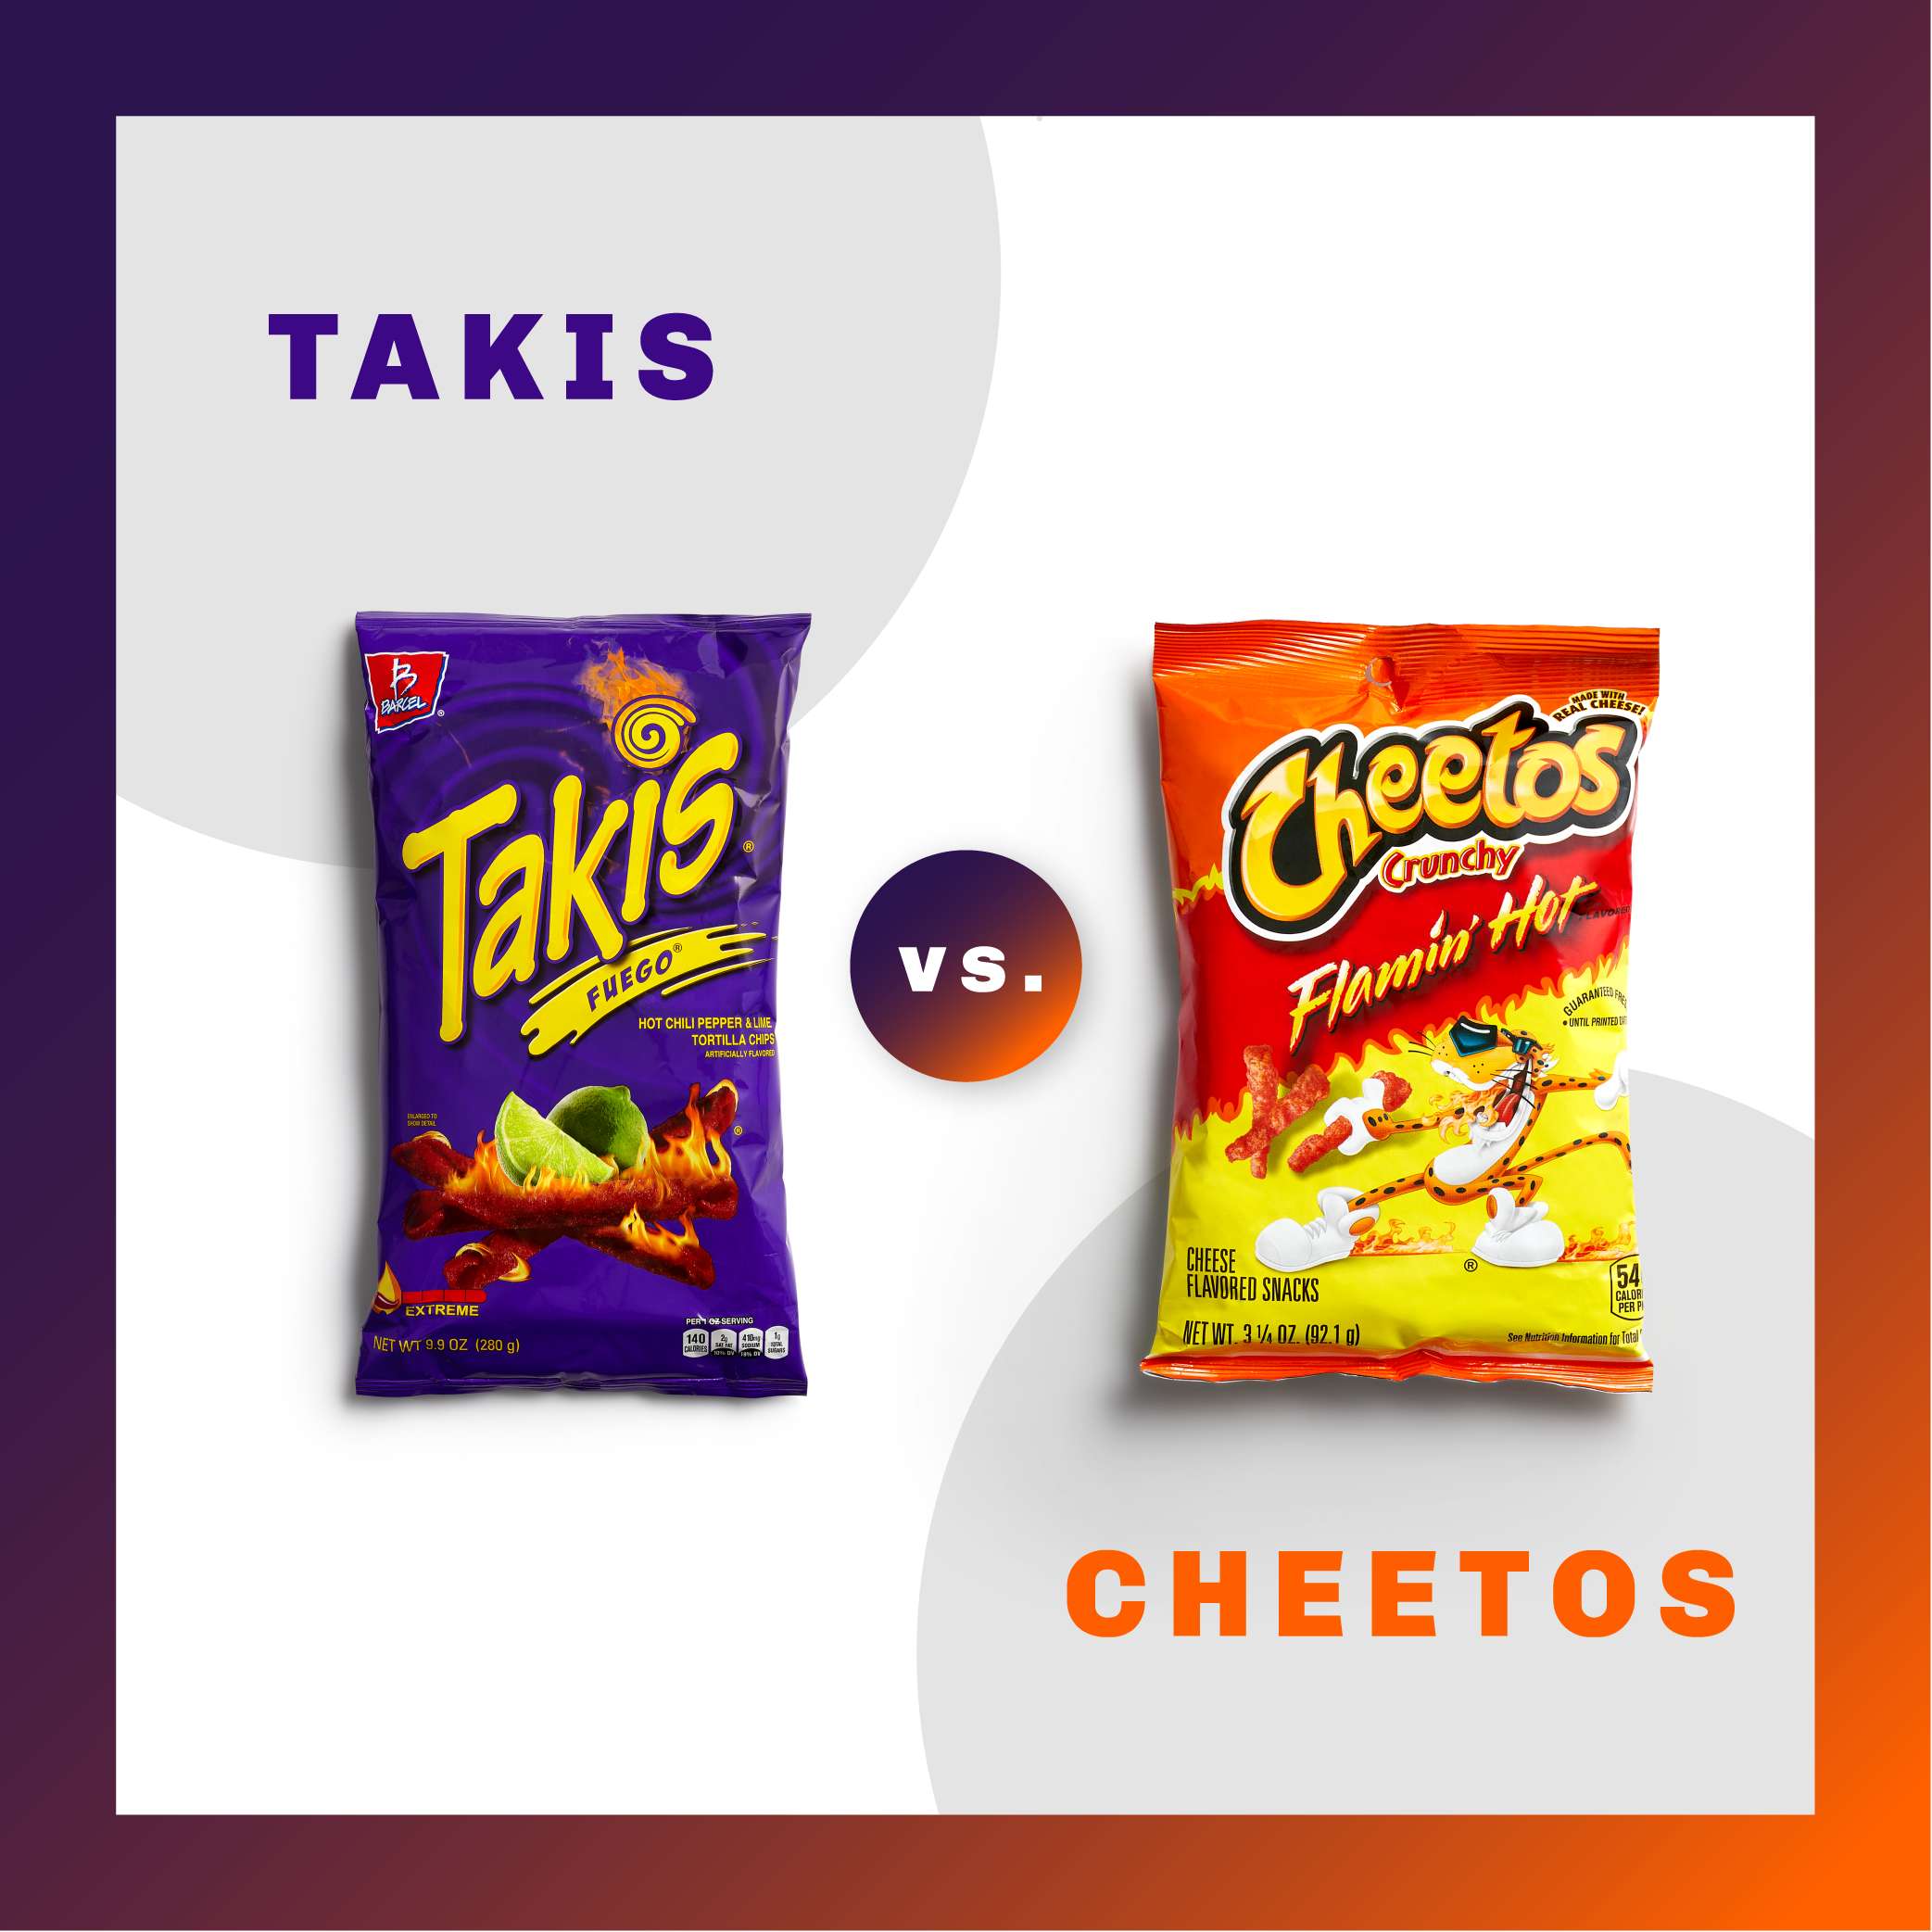 Graphic with Takis and Cheetos bags side-by-side